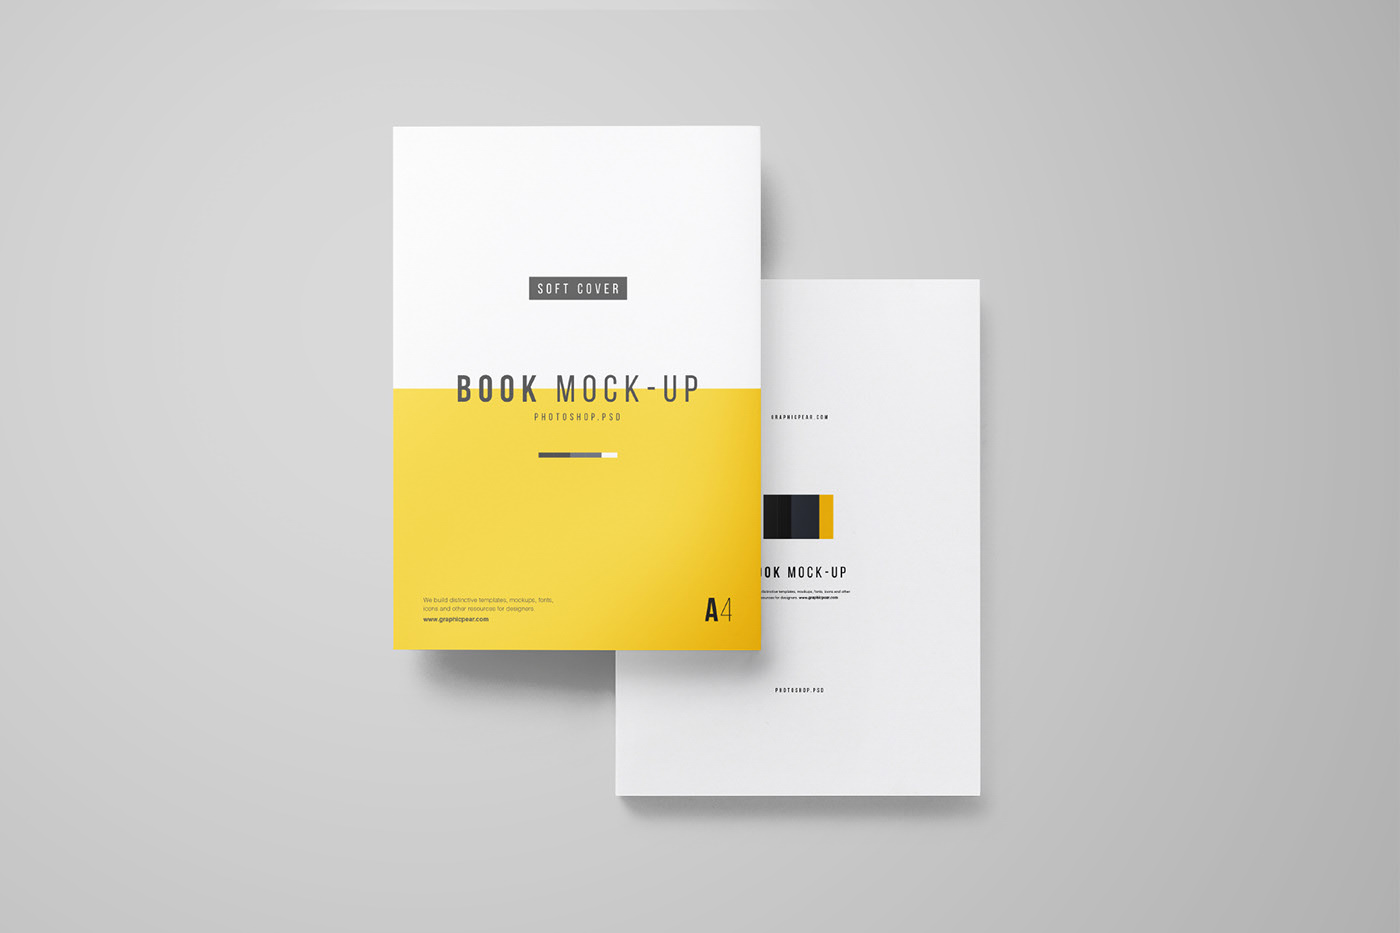 A minimalistic and modern A4 book mock-up presented on a plain background, featuring a striking yellow and black color scheme.